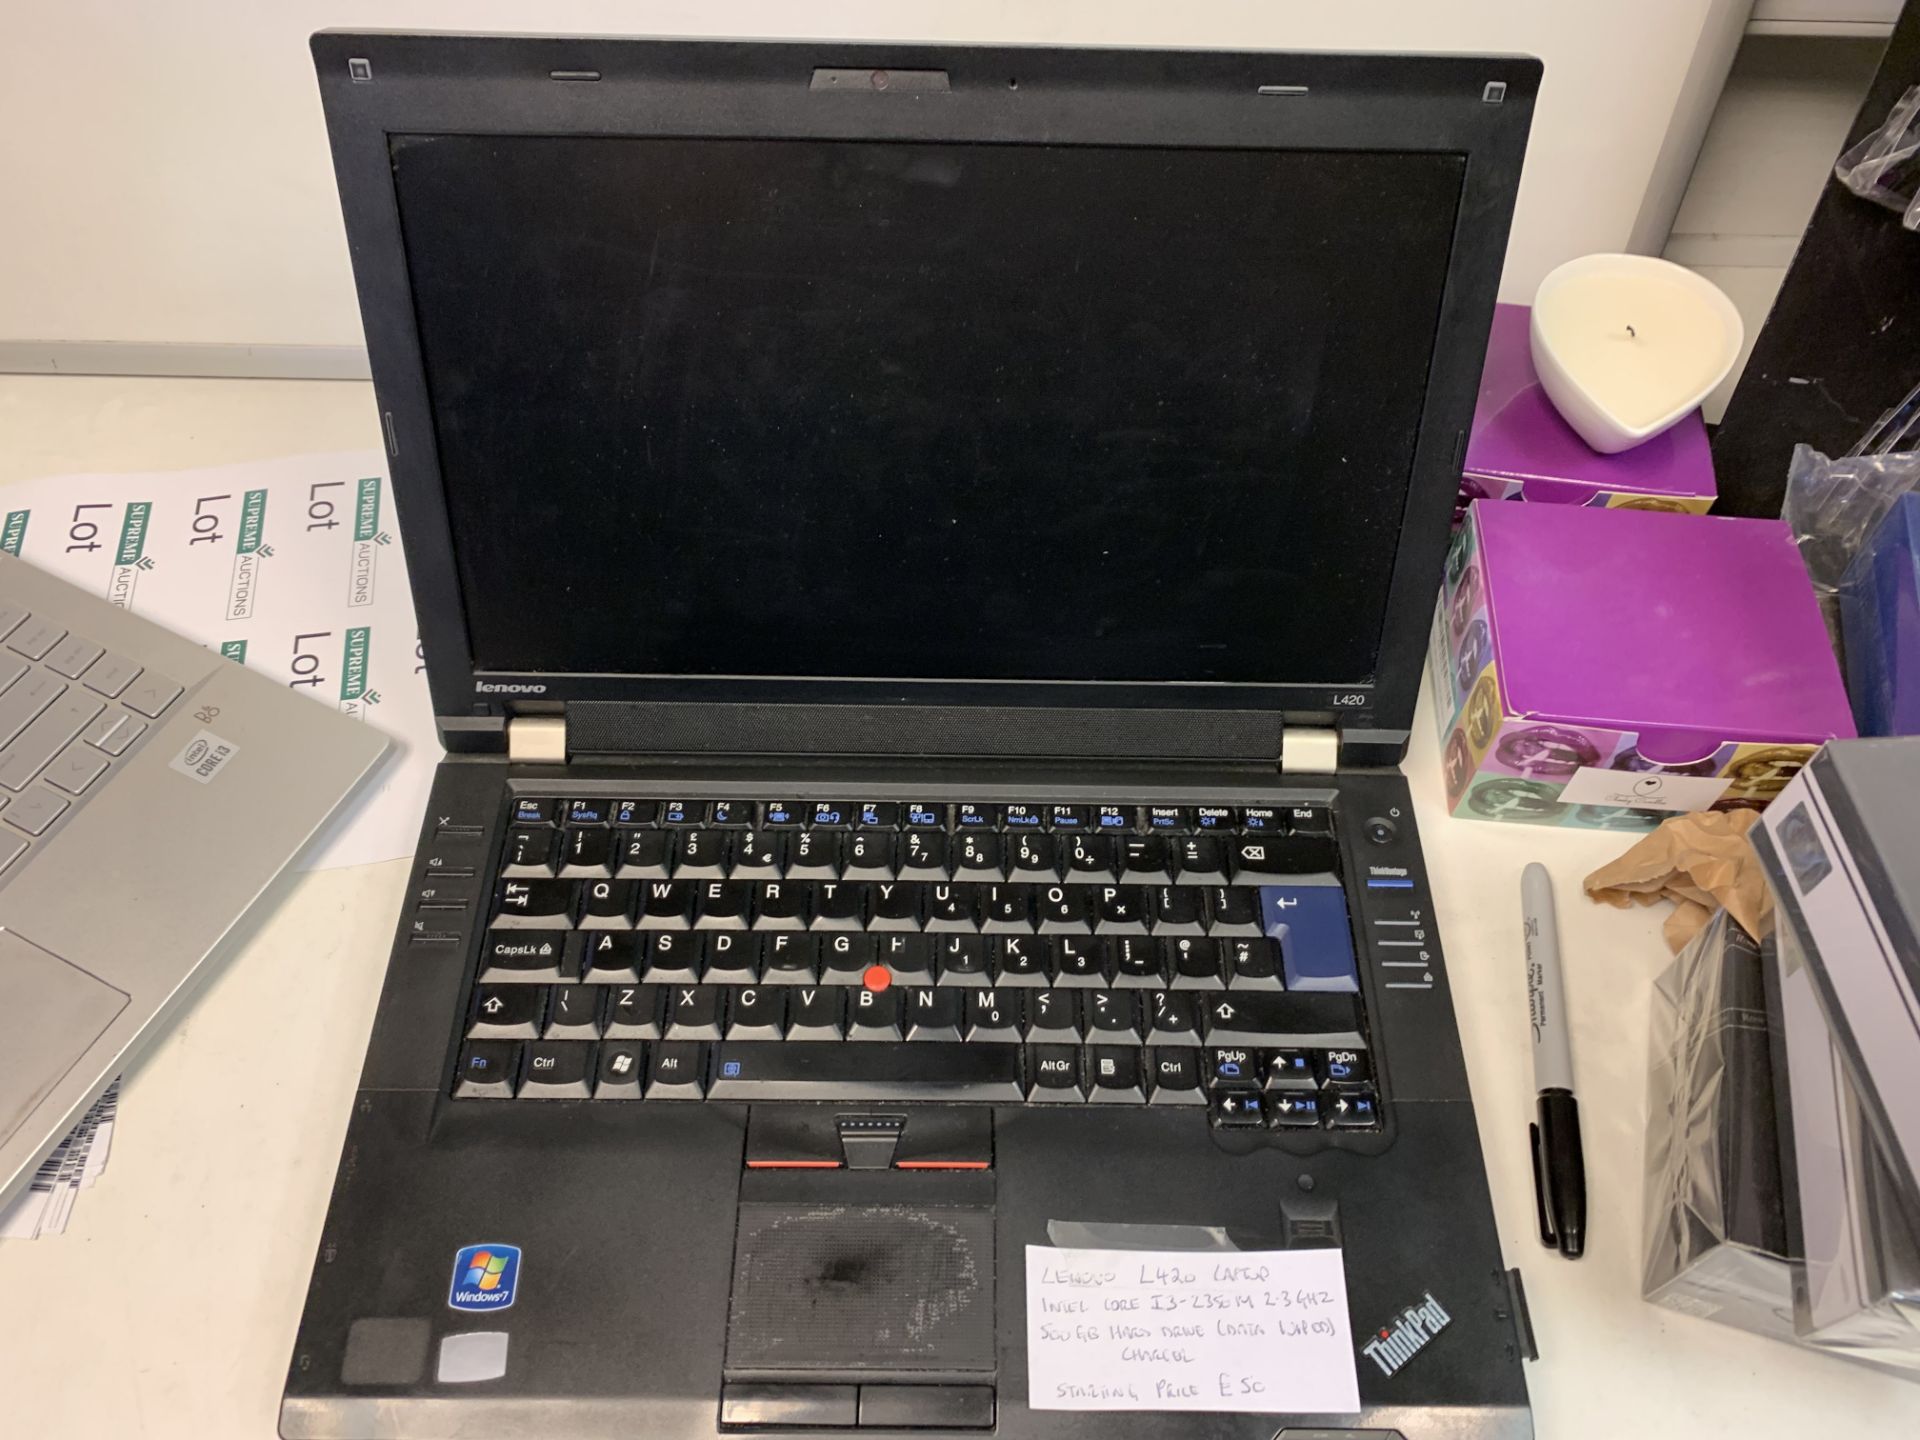 LENOVO L420 LAPTOP, INTEL CORE i3-2350IM 2.3GHZ, 500GB HARD DRIVE ( DATA WIPED ) WITH CHARGER